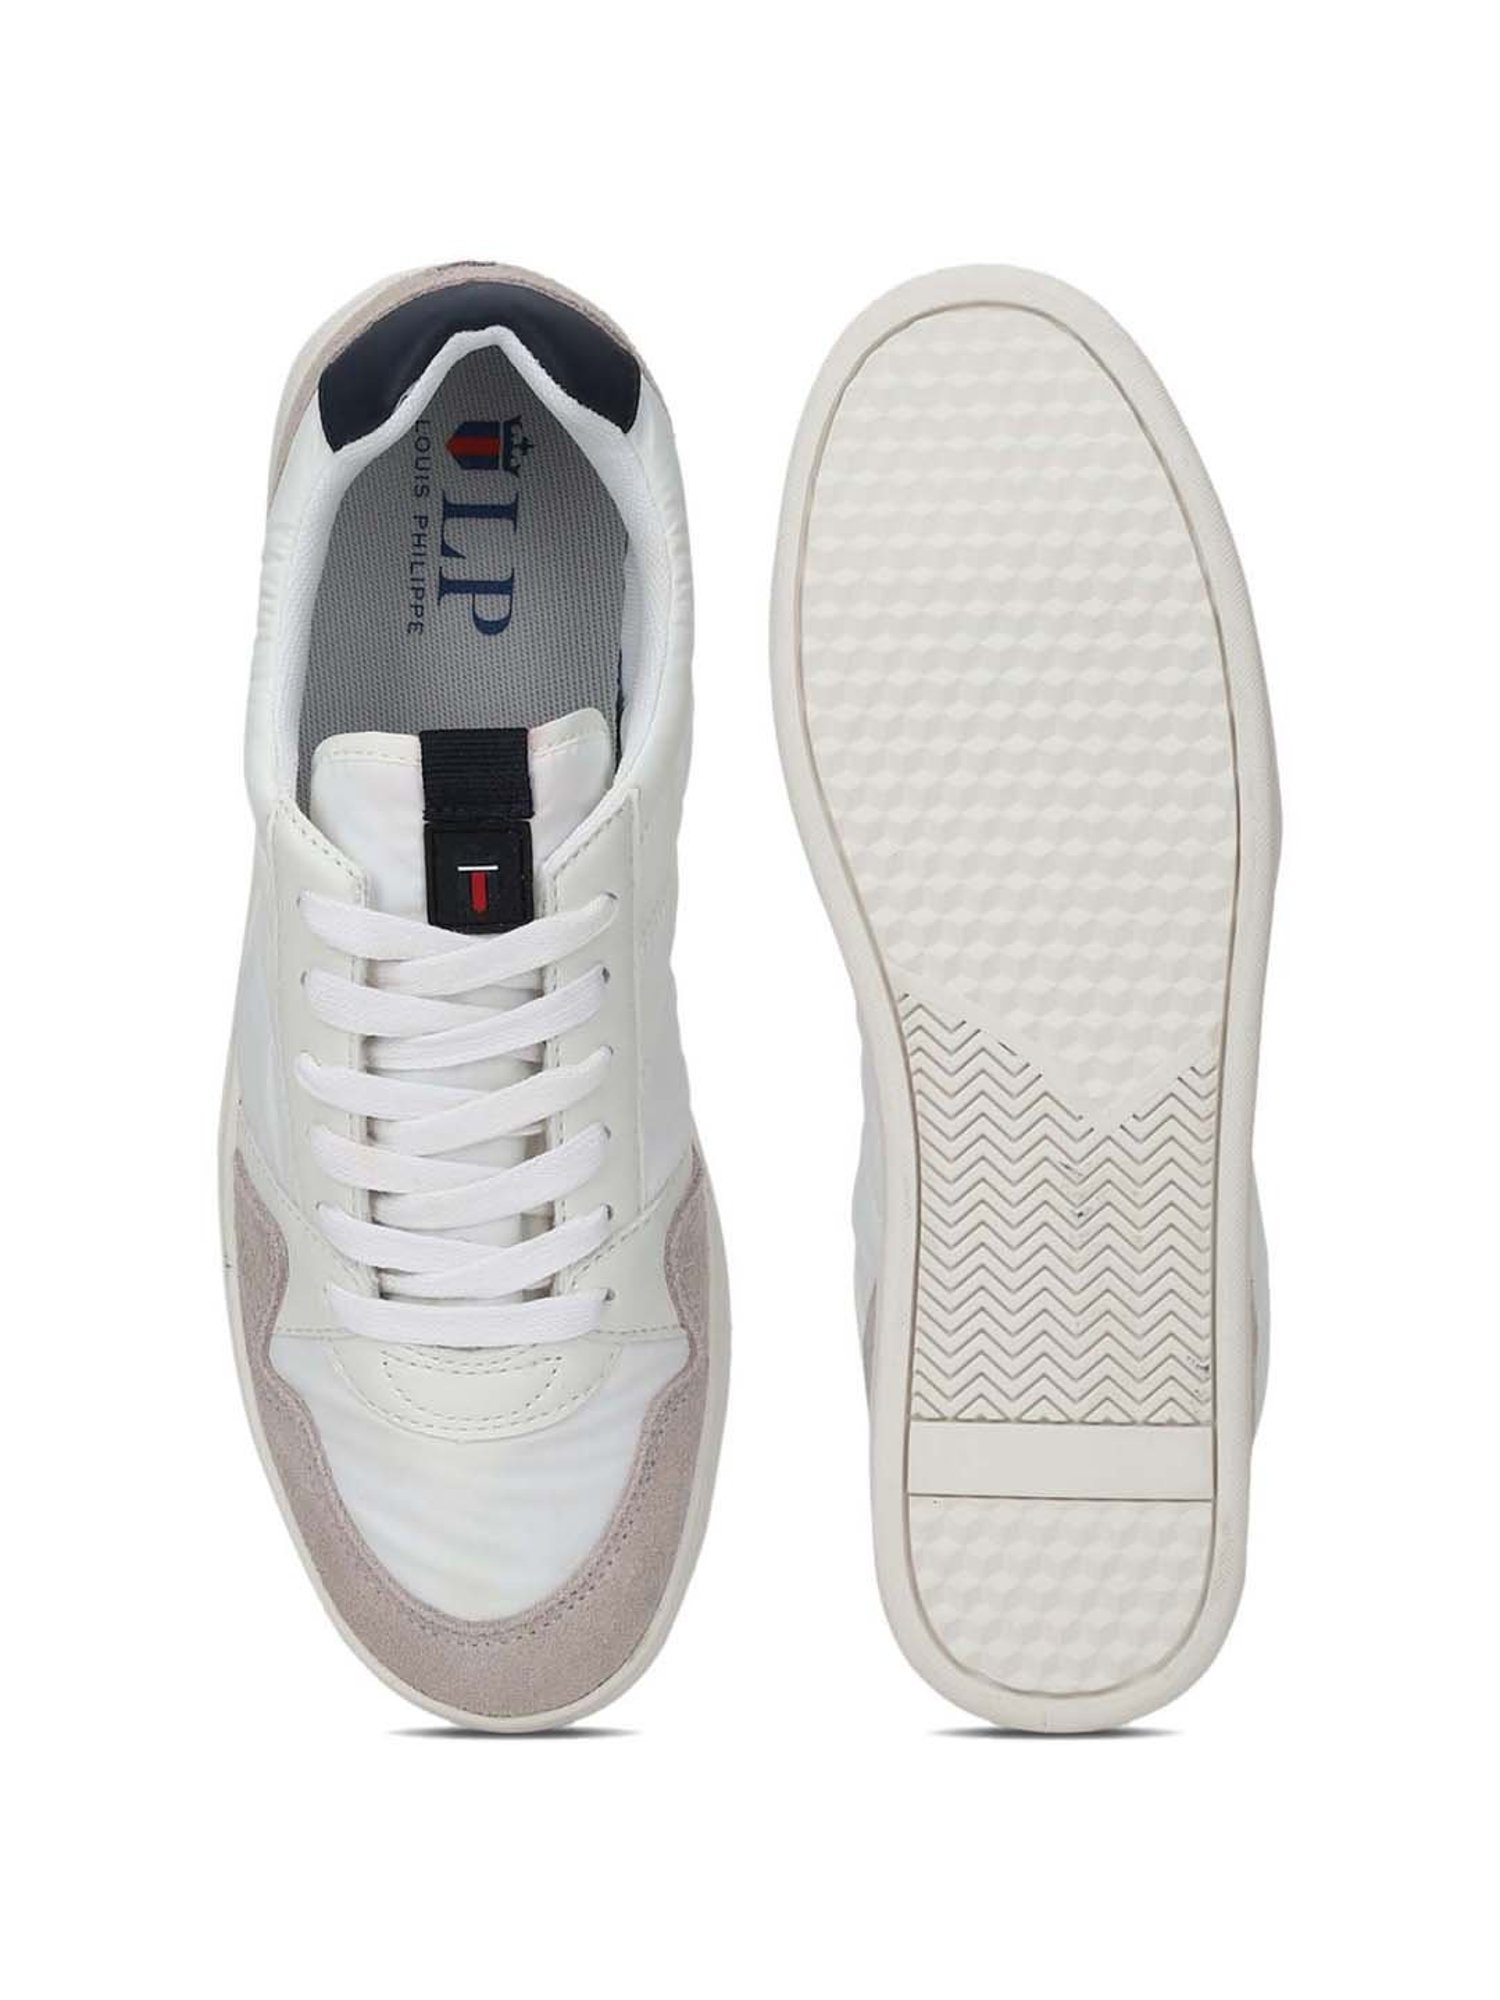 Buy Louis Philippe White Casual Sneakers for Men at Best Price @ Tata CLiQ